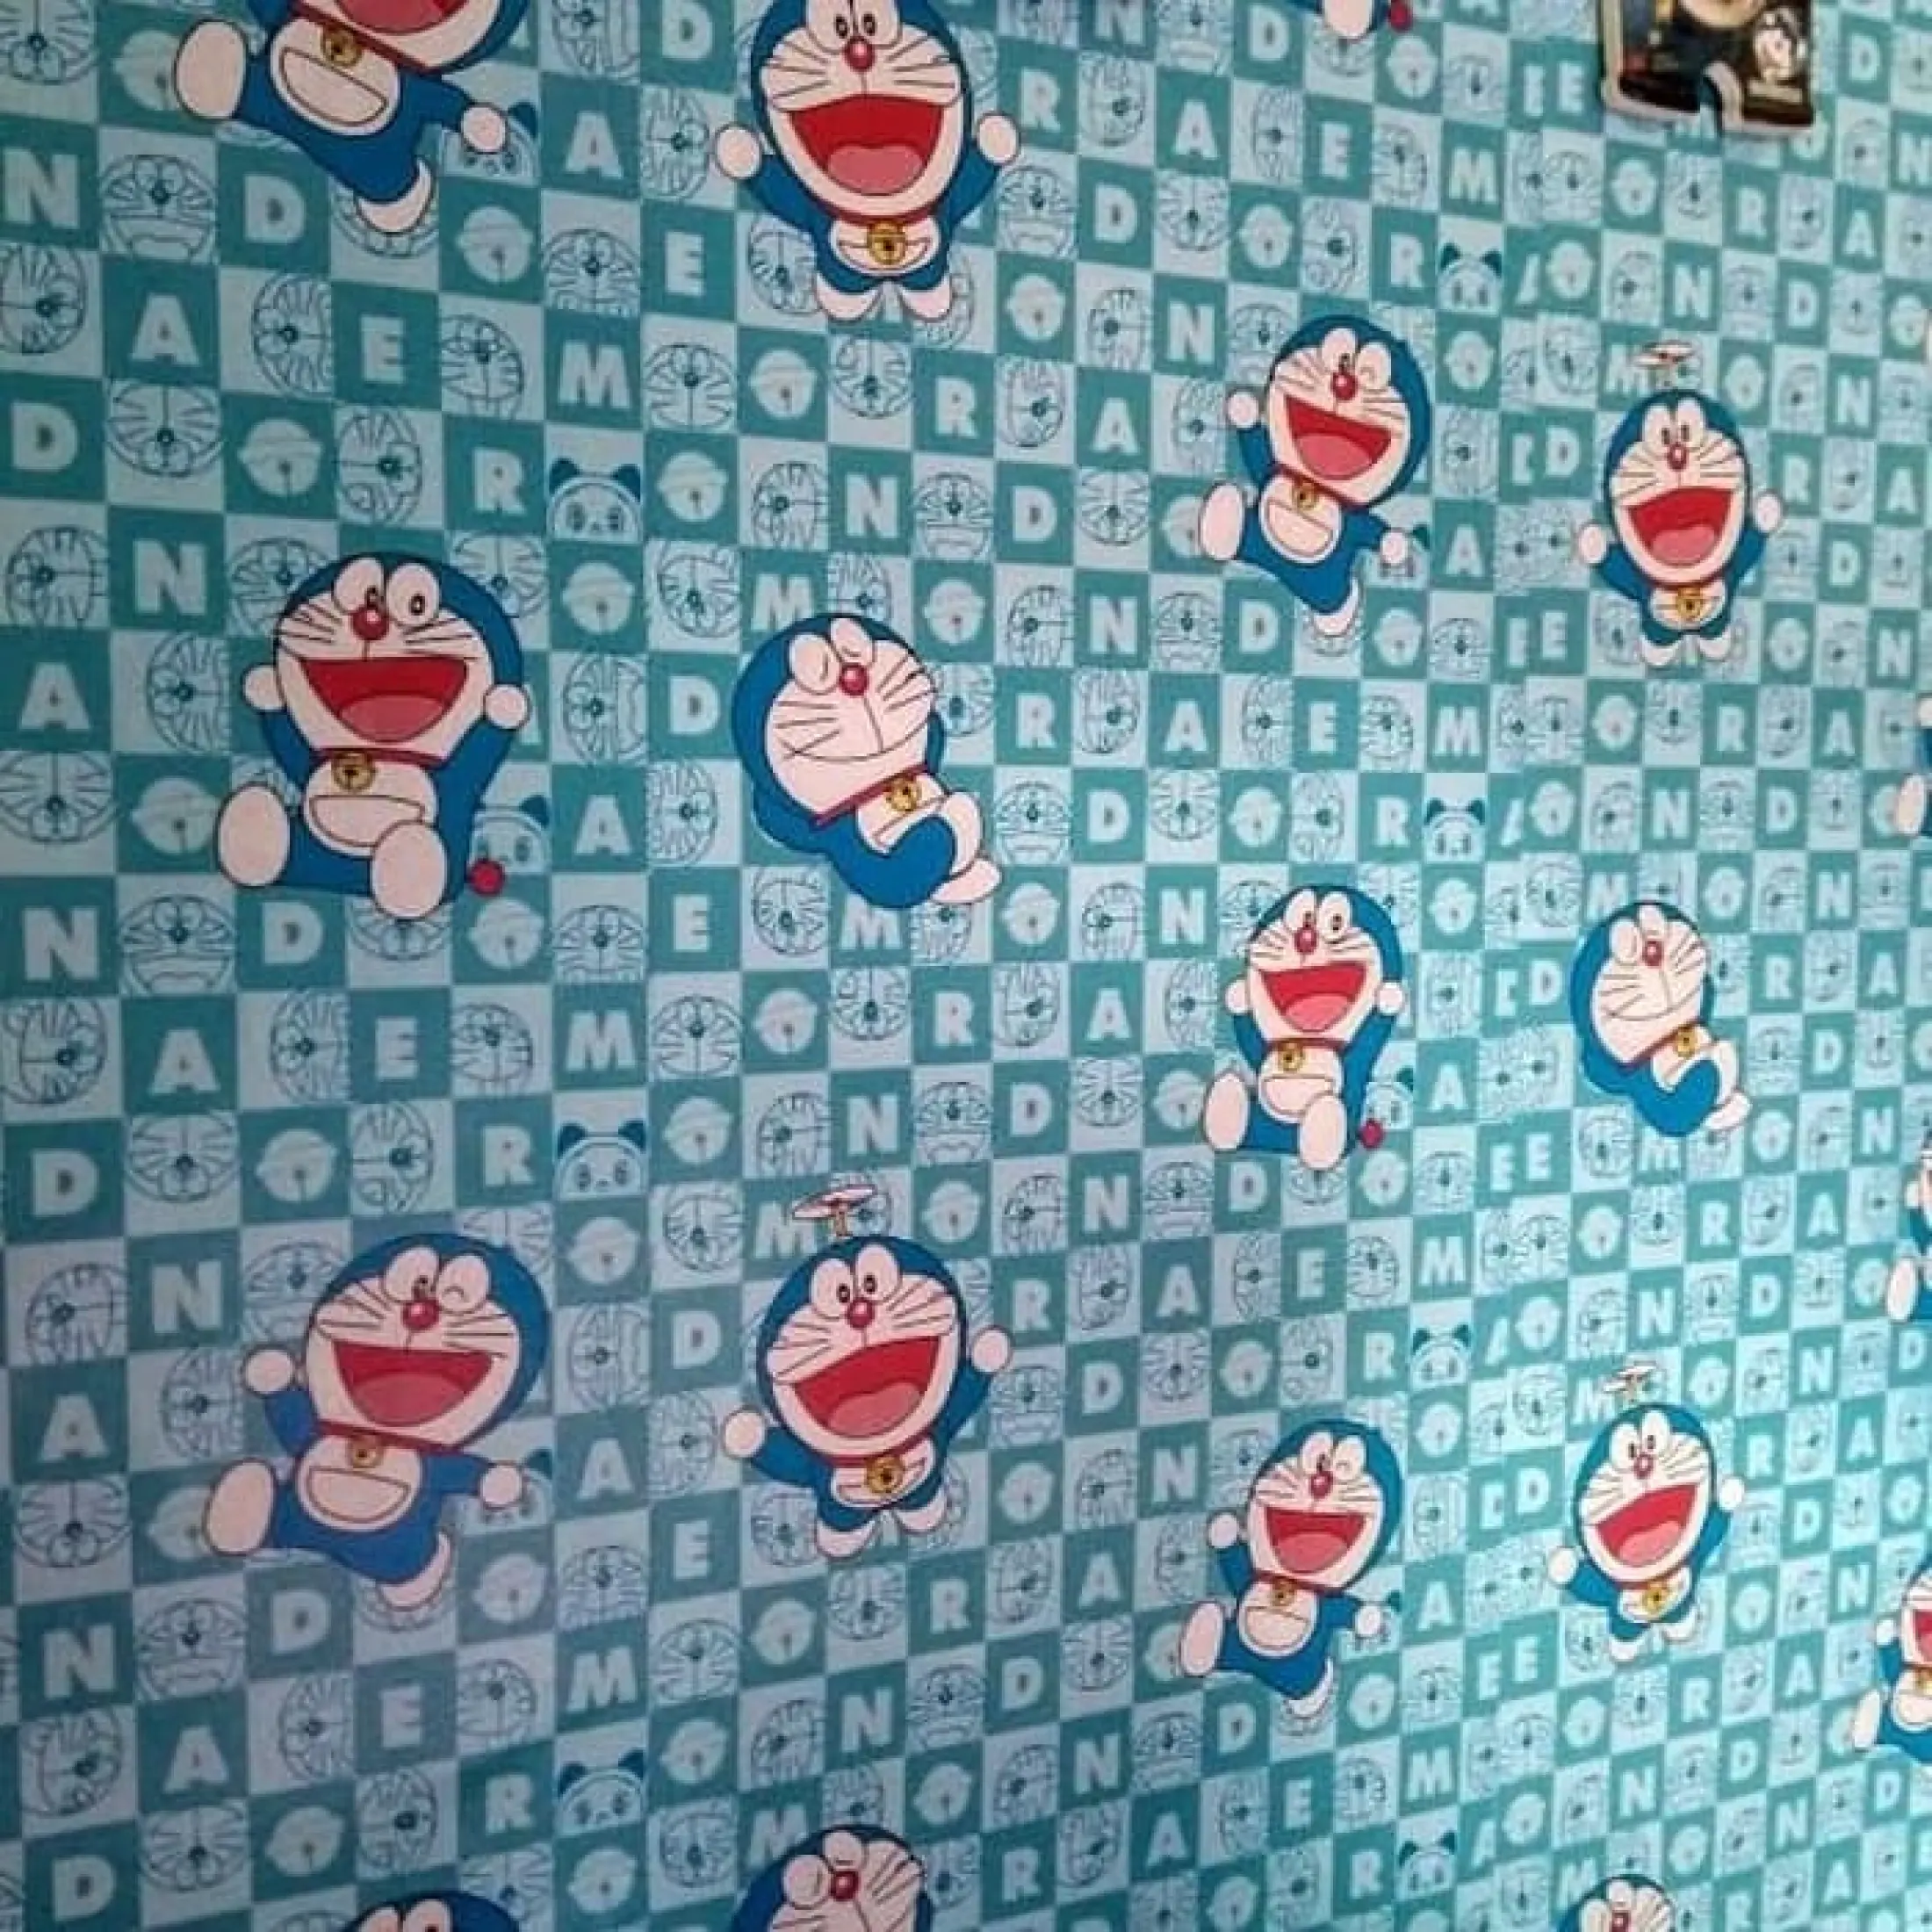 Doraemon Wallpaper Self Adhesive New Design Wallpaper Waterproof Pvc With Glue Wall Stickers Renovation Background Sticker For Home Bedroom Living Room Lazada Ph